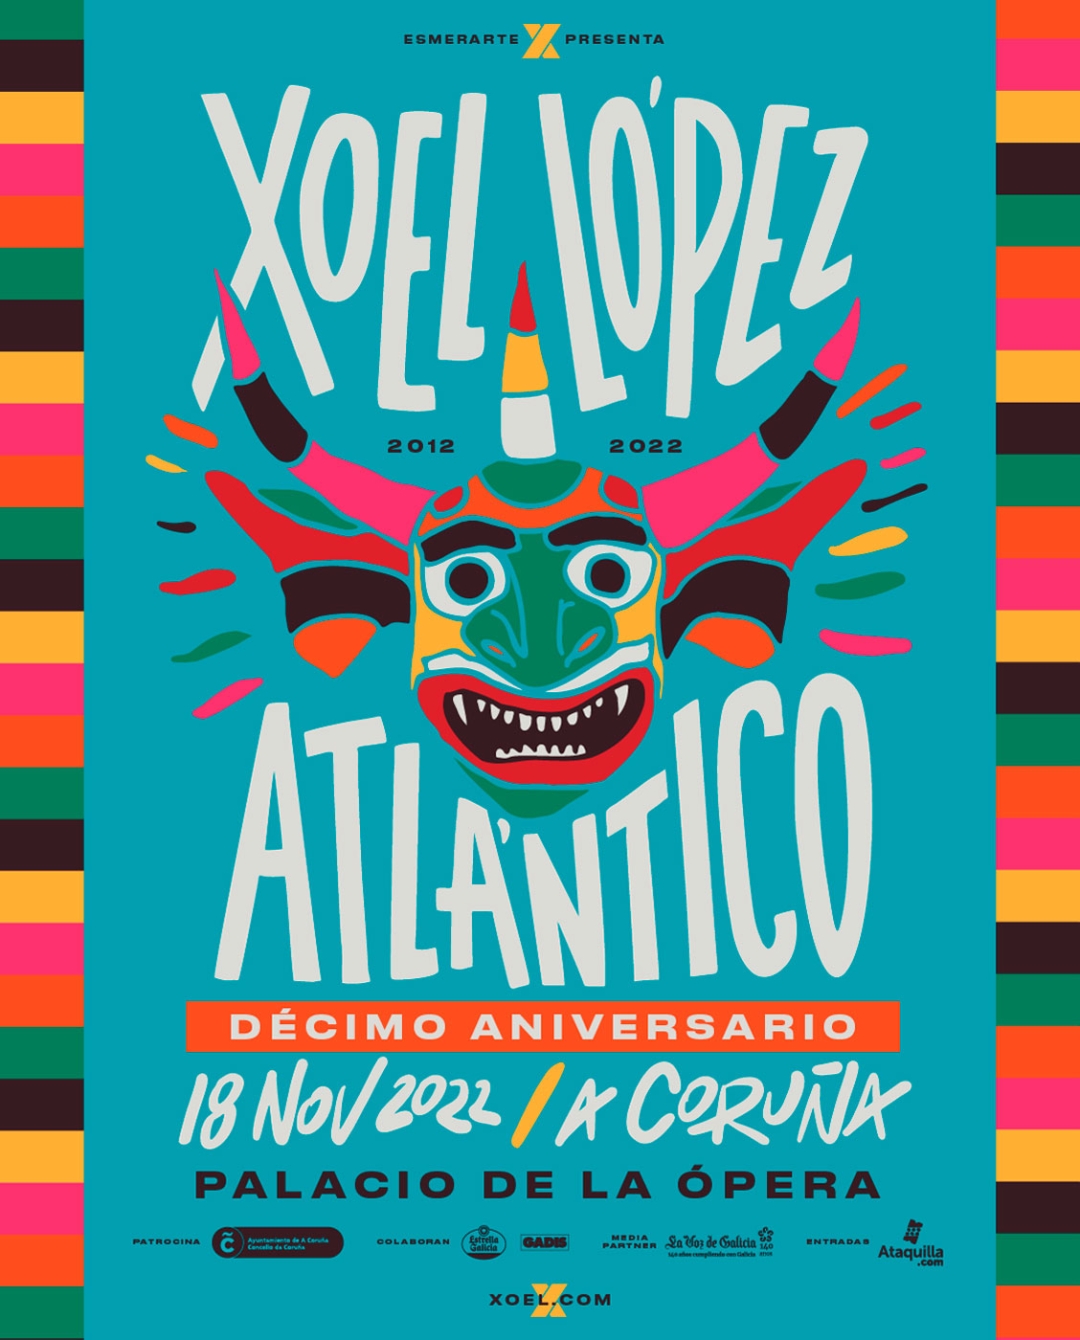 Poster of the concert for the 10th anniversary of 'Atlántico'.